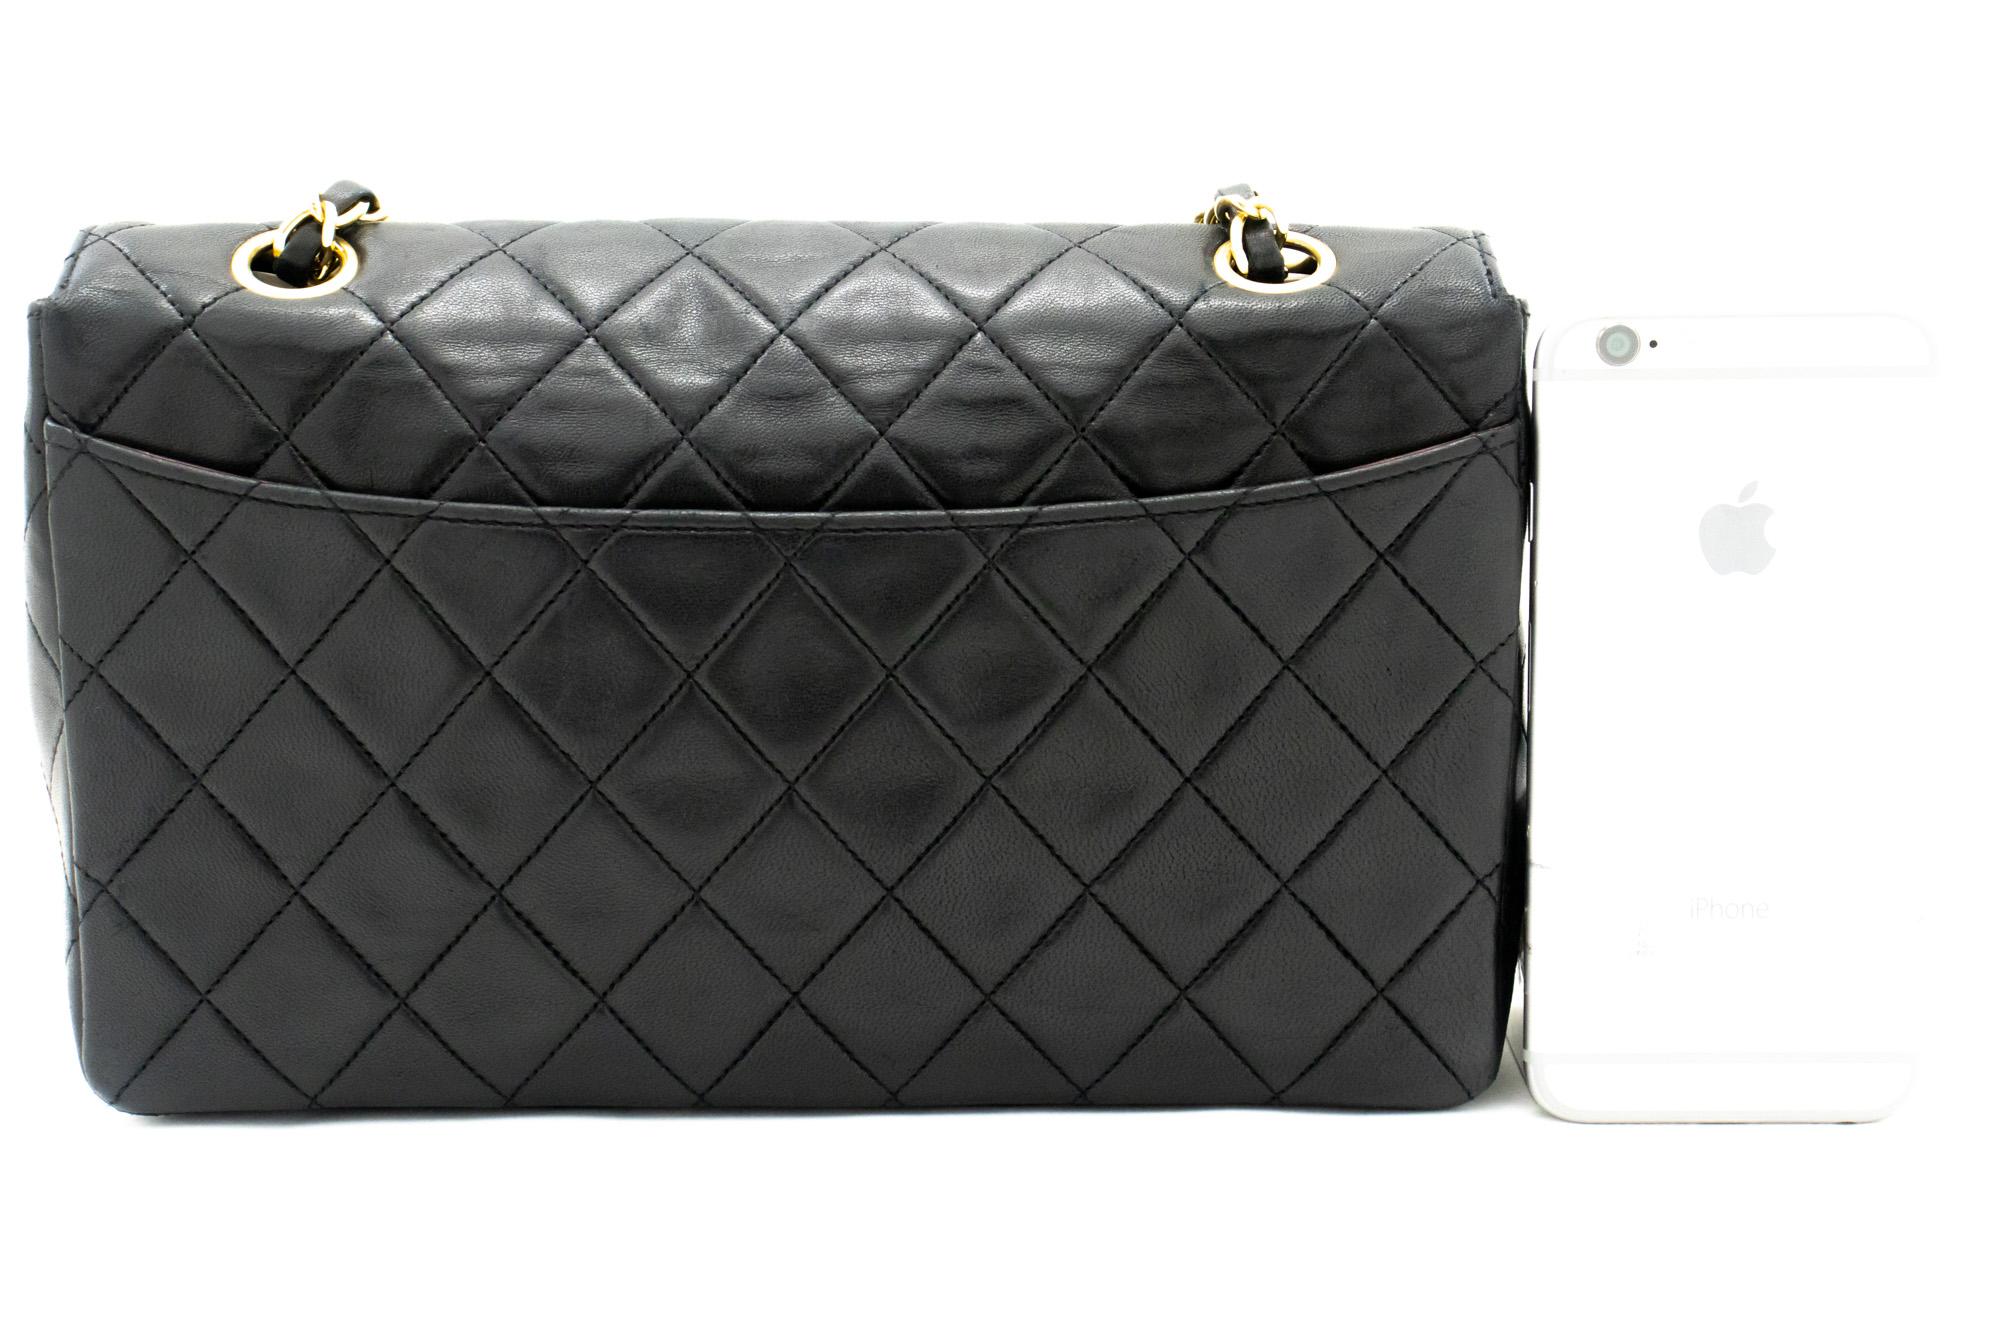 Black CHANEL Vintage Classic Chain Shoulder Bag Flap Quilted Lambskin